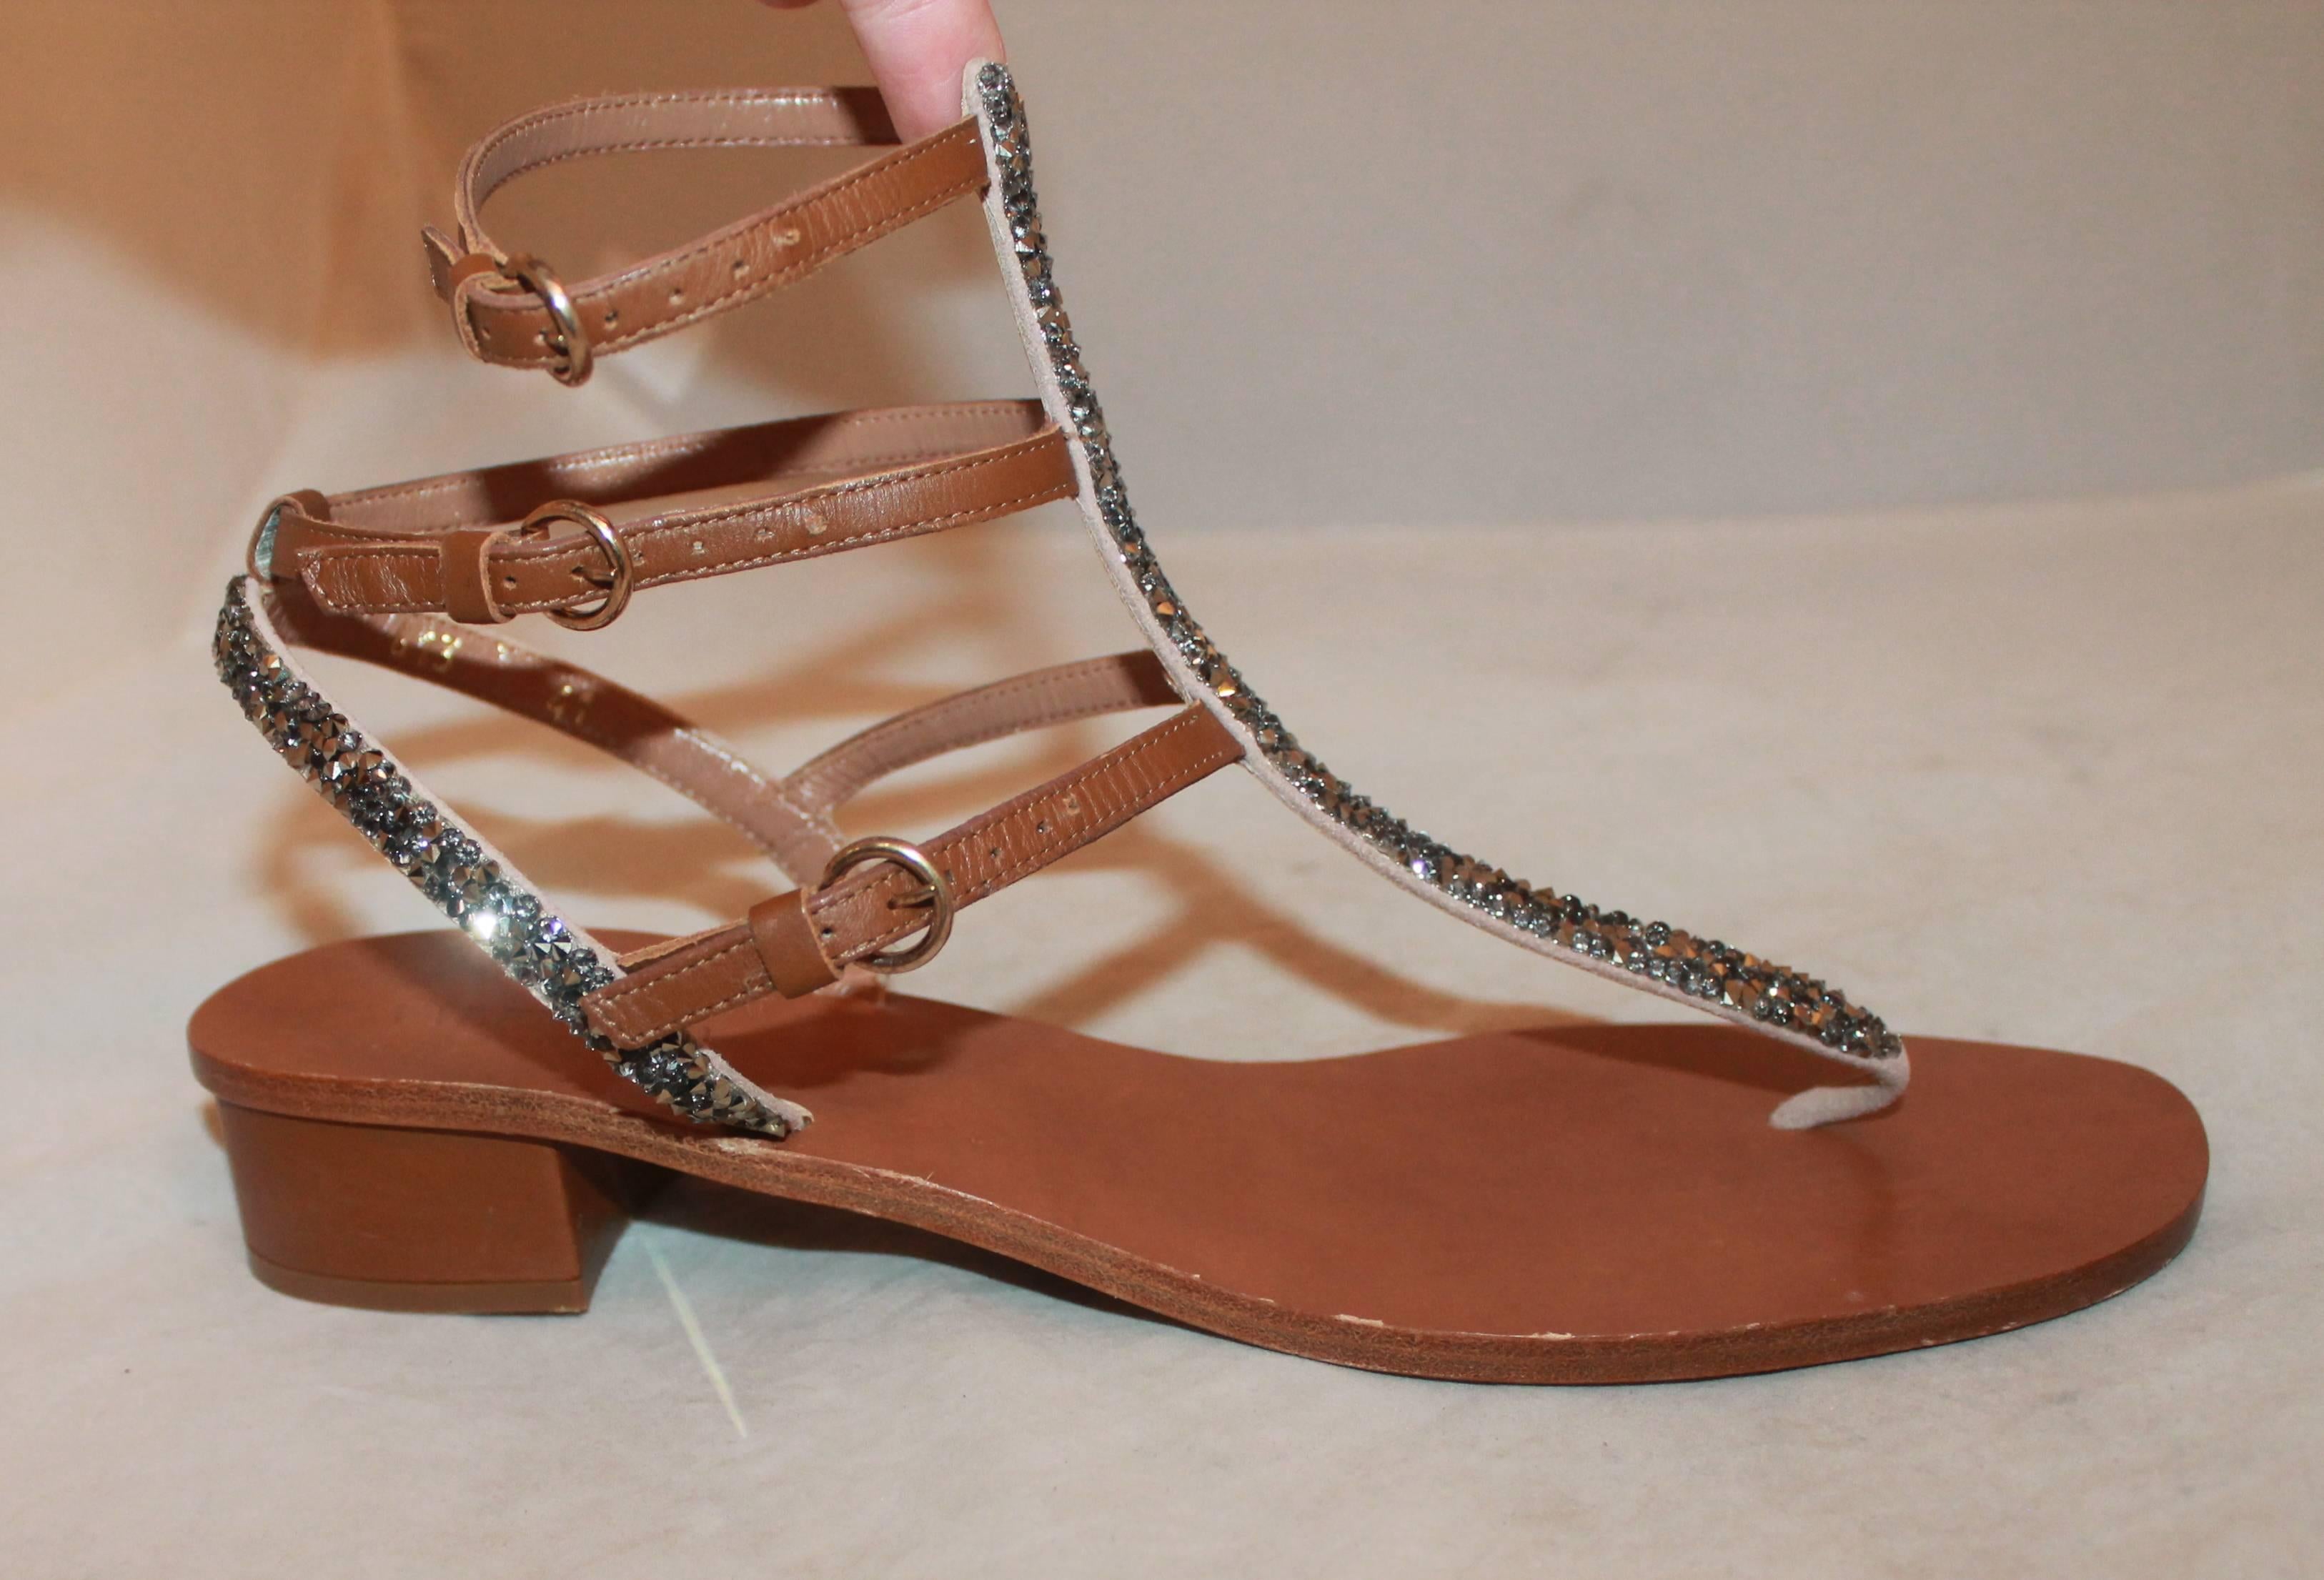 Valentino Brown Leather & Suede Gladiator Sandals w/ Gunmental Rhinestones - 41.  These lovely sandals are in excellent condition with very minimal wear.  They feature a lovely brown leather, suede straps down the middle and on the heel with